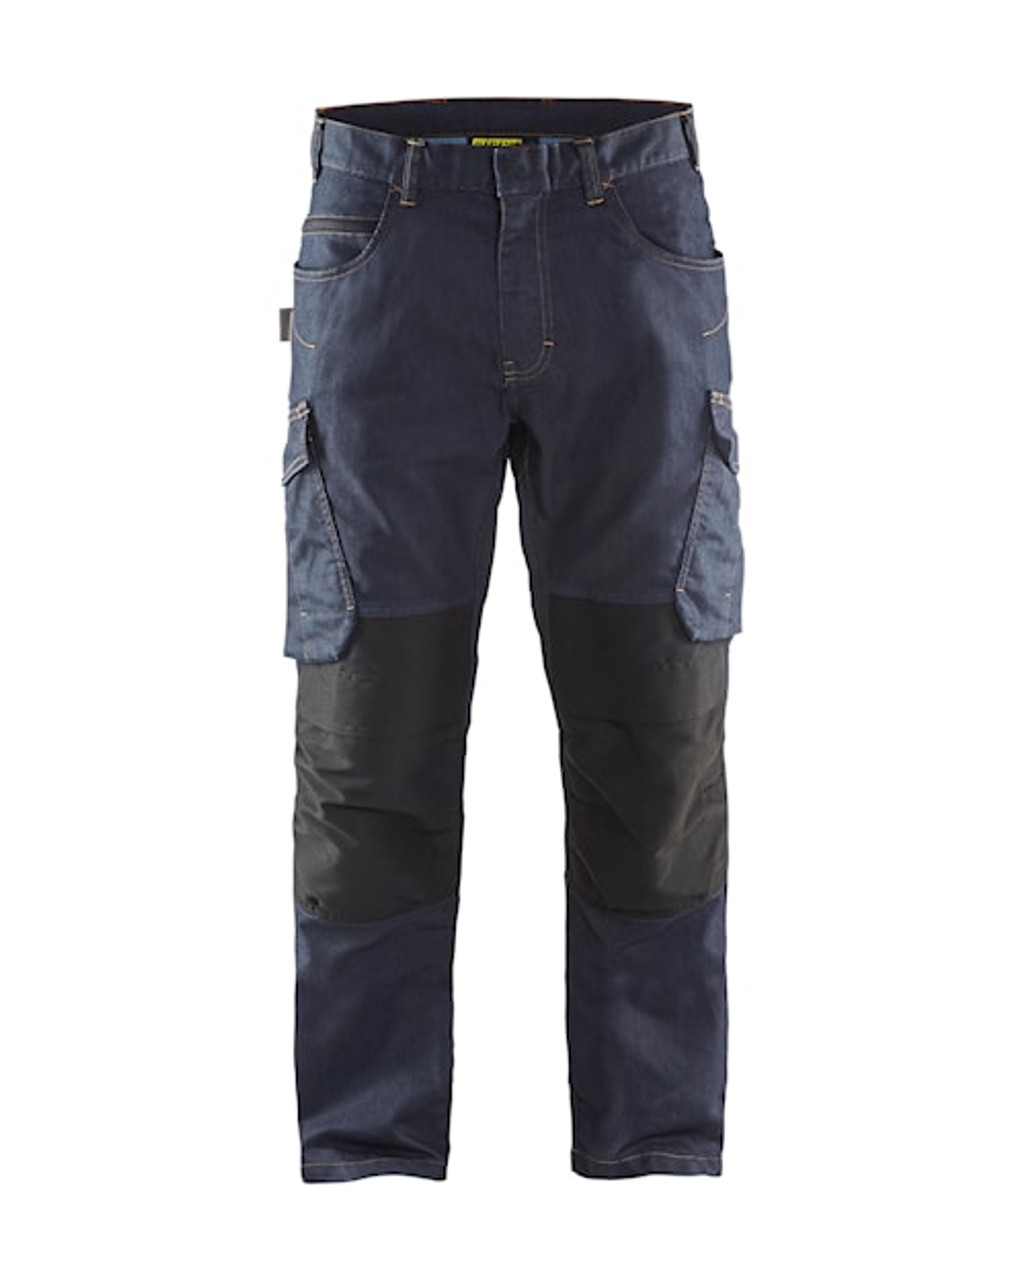 BLAKLADER Trousers 1497 with Kneepad Pockets  for BLAKLADER Trousers | 1497 Mens Service Navy Blue Trousers with Kneepad Pockets and Denim with Stretch that have Configuration available in Carpentry